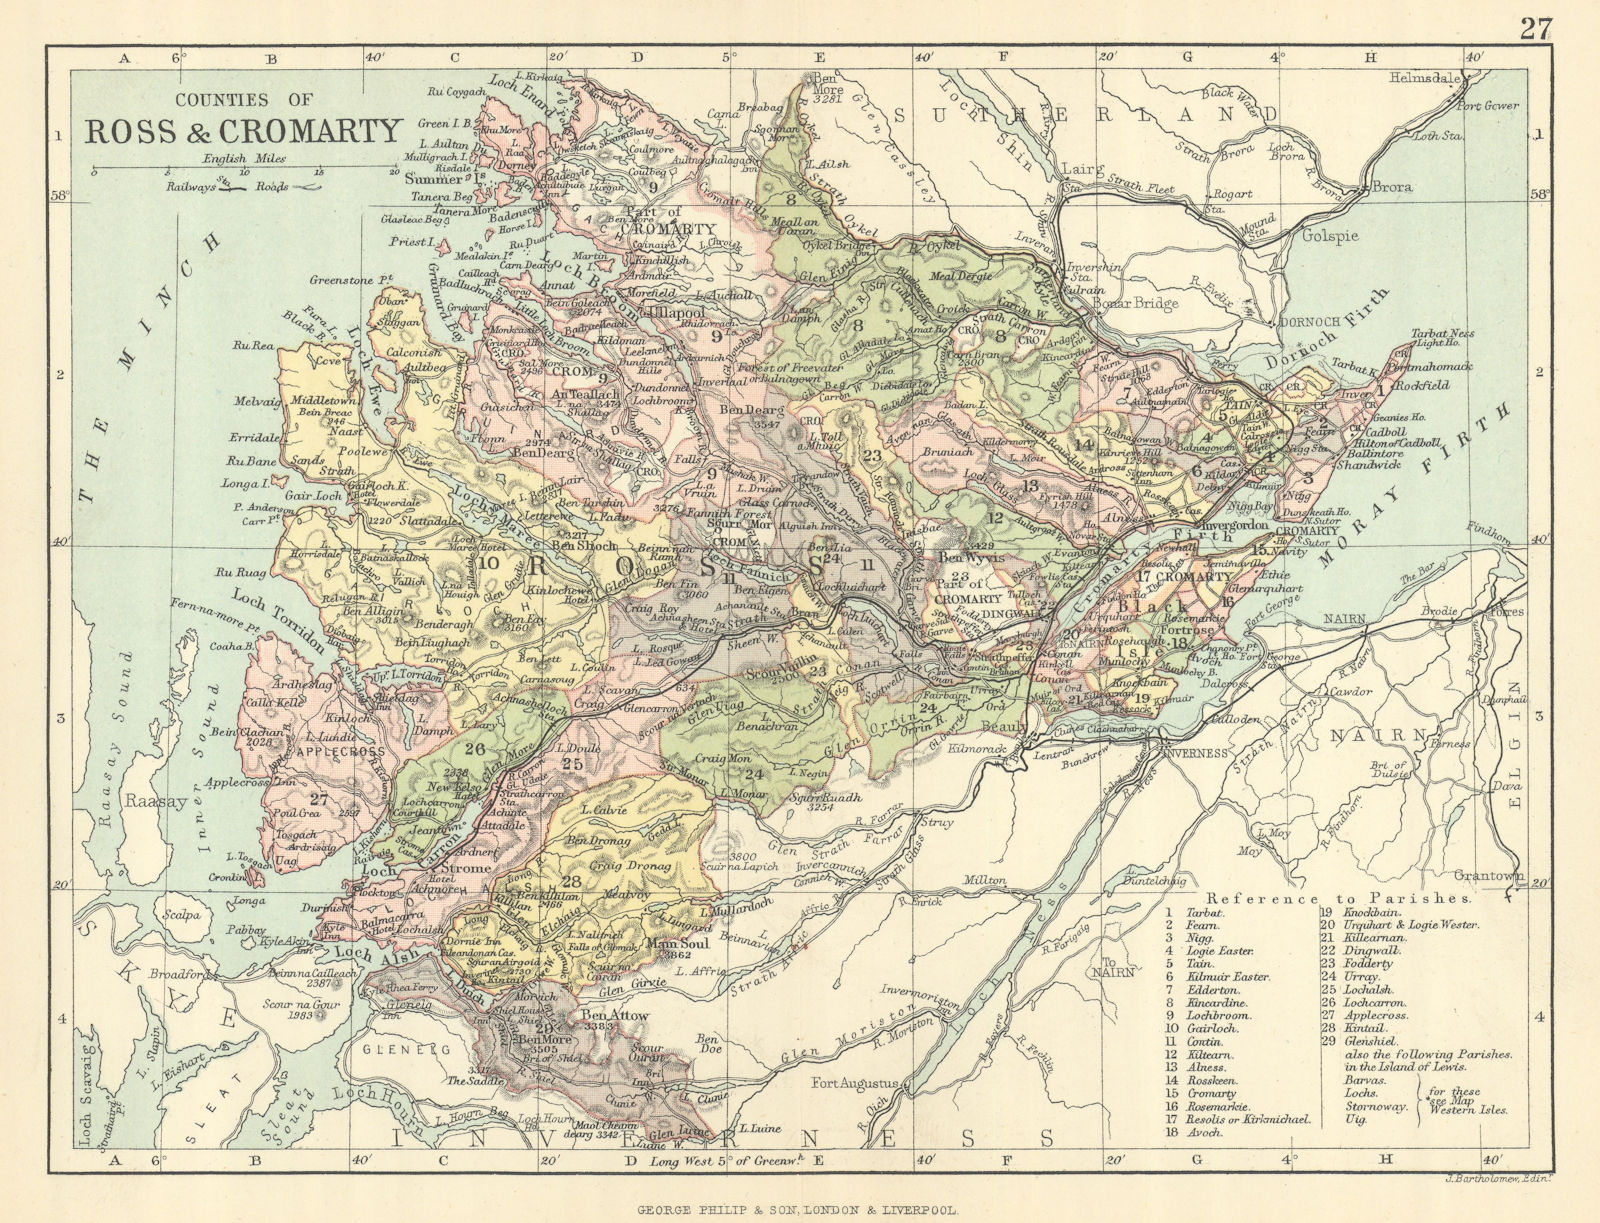 Associate Product 'Counties of Ross & Cromarty'. Ross-shire & Cromartyshire. BARTHOLOMEW 1886 map